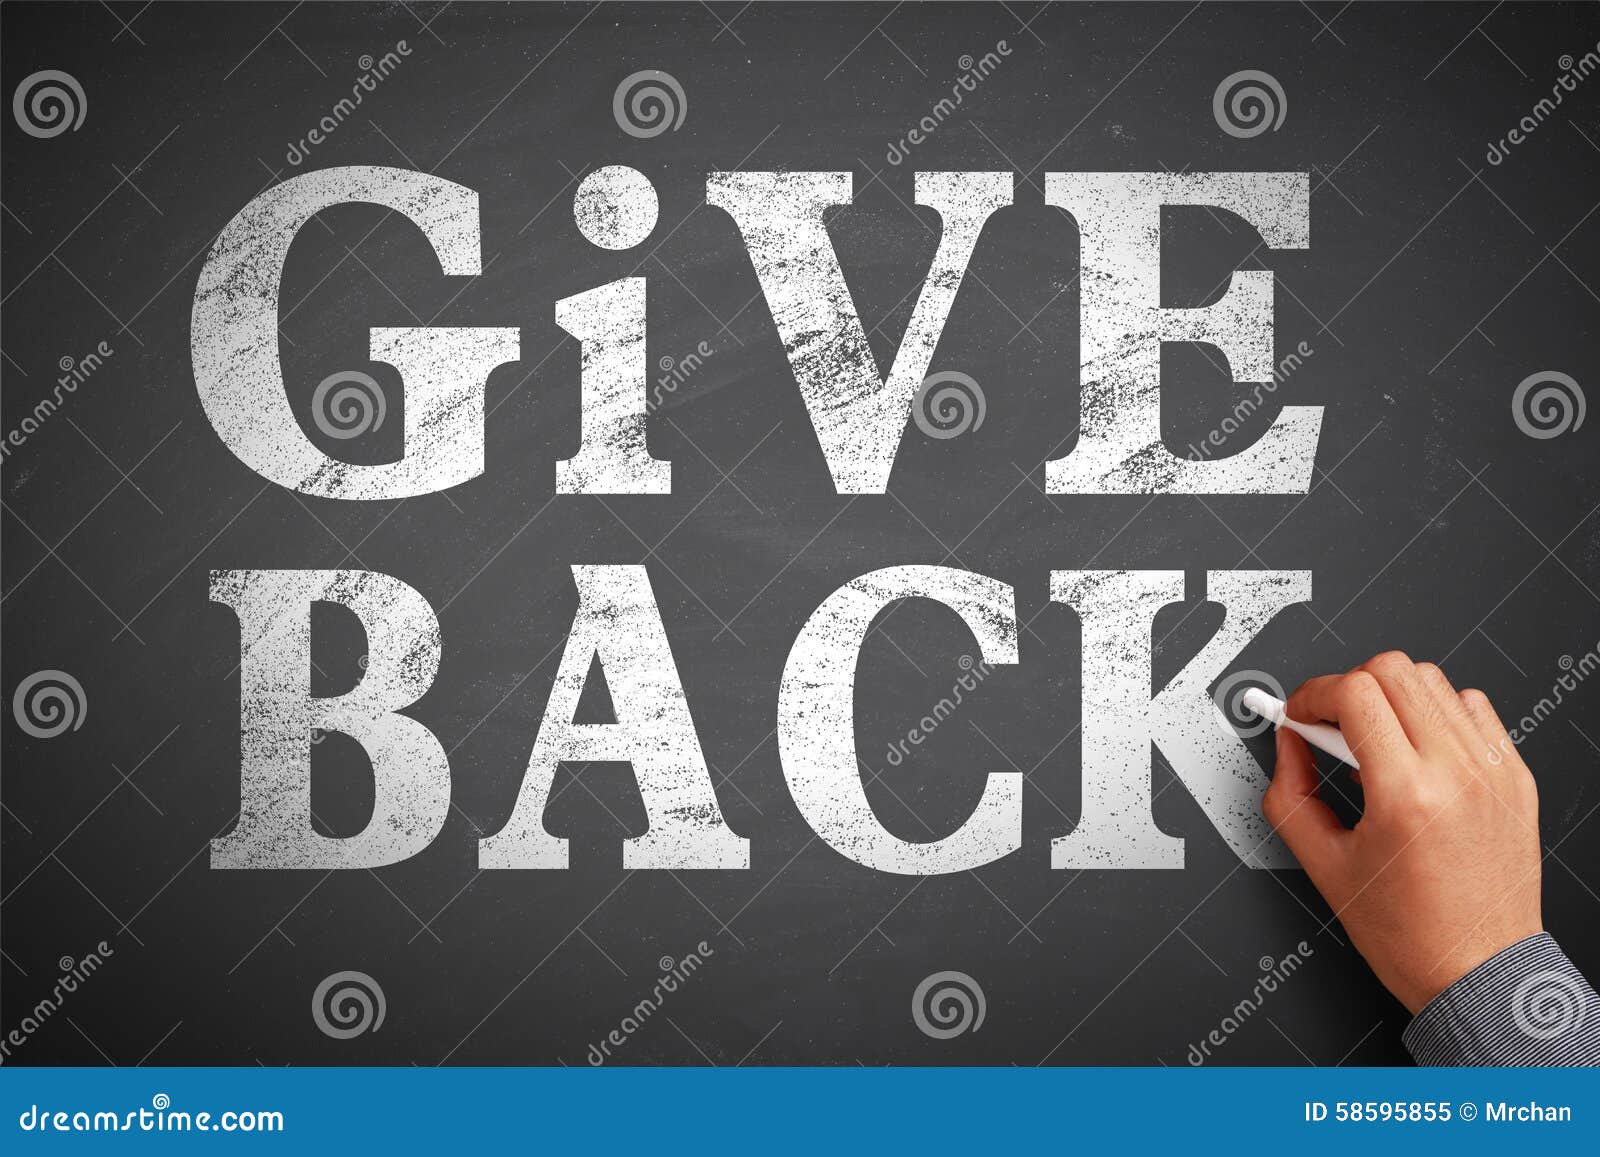 Get back to word. Give back картинка. Give back.